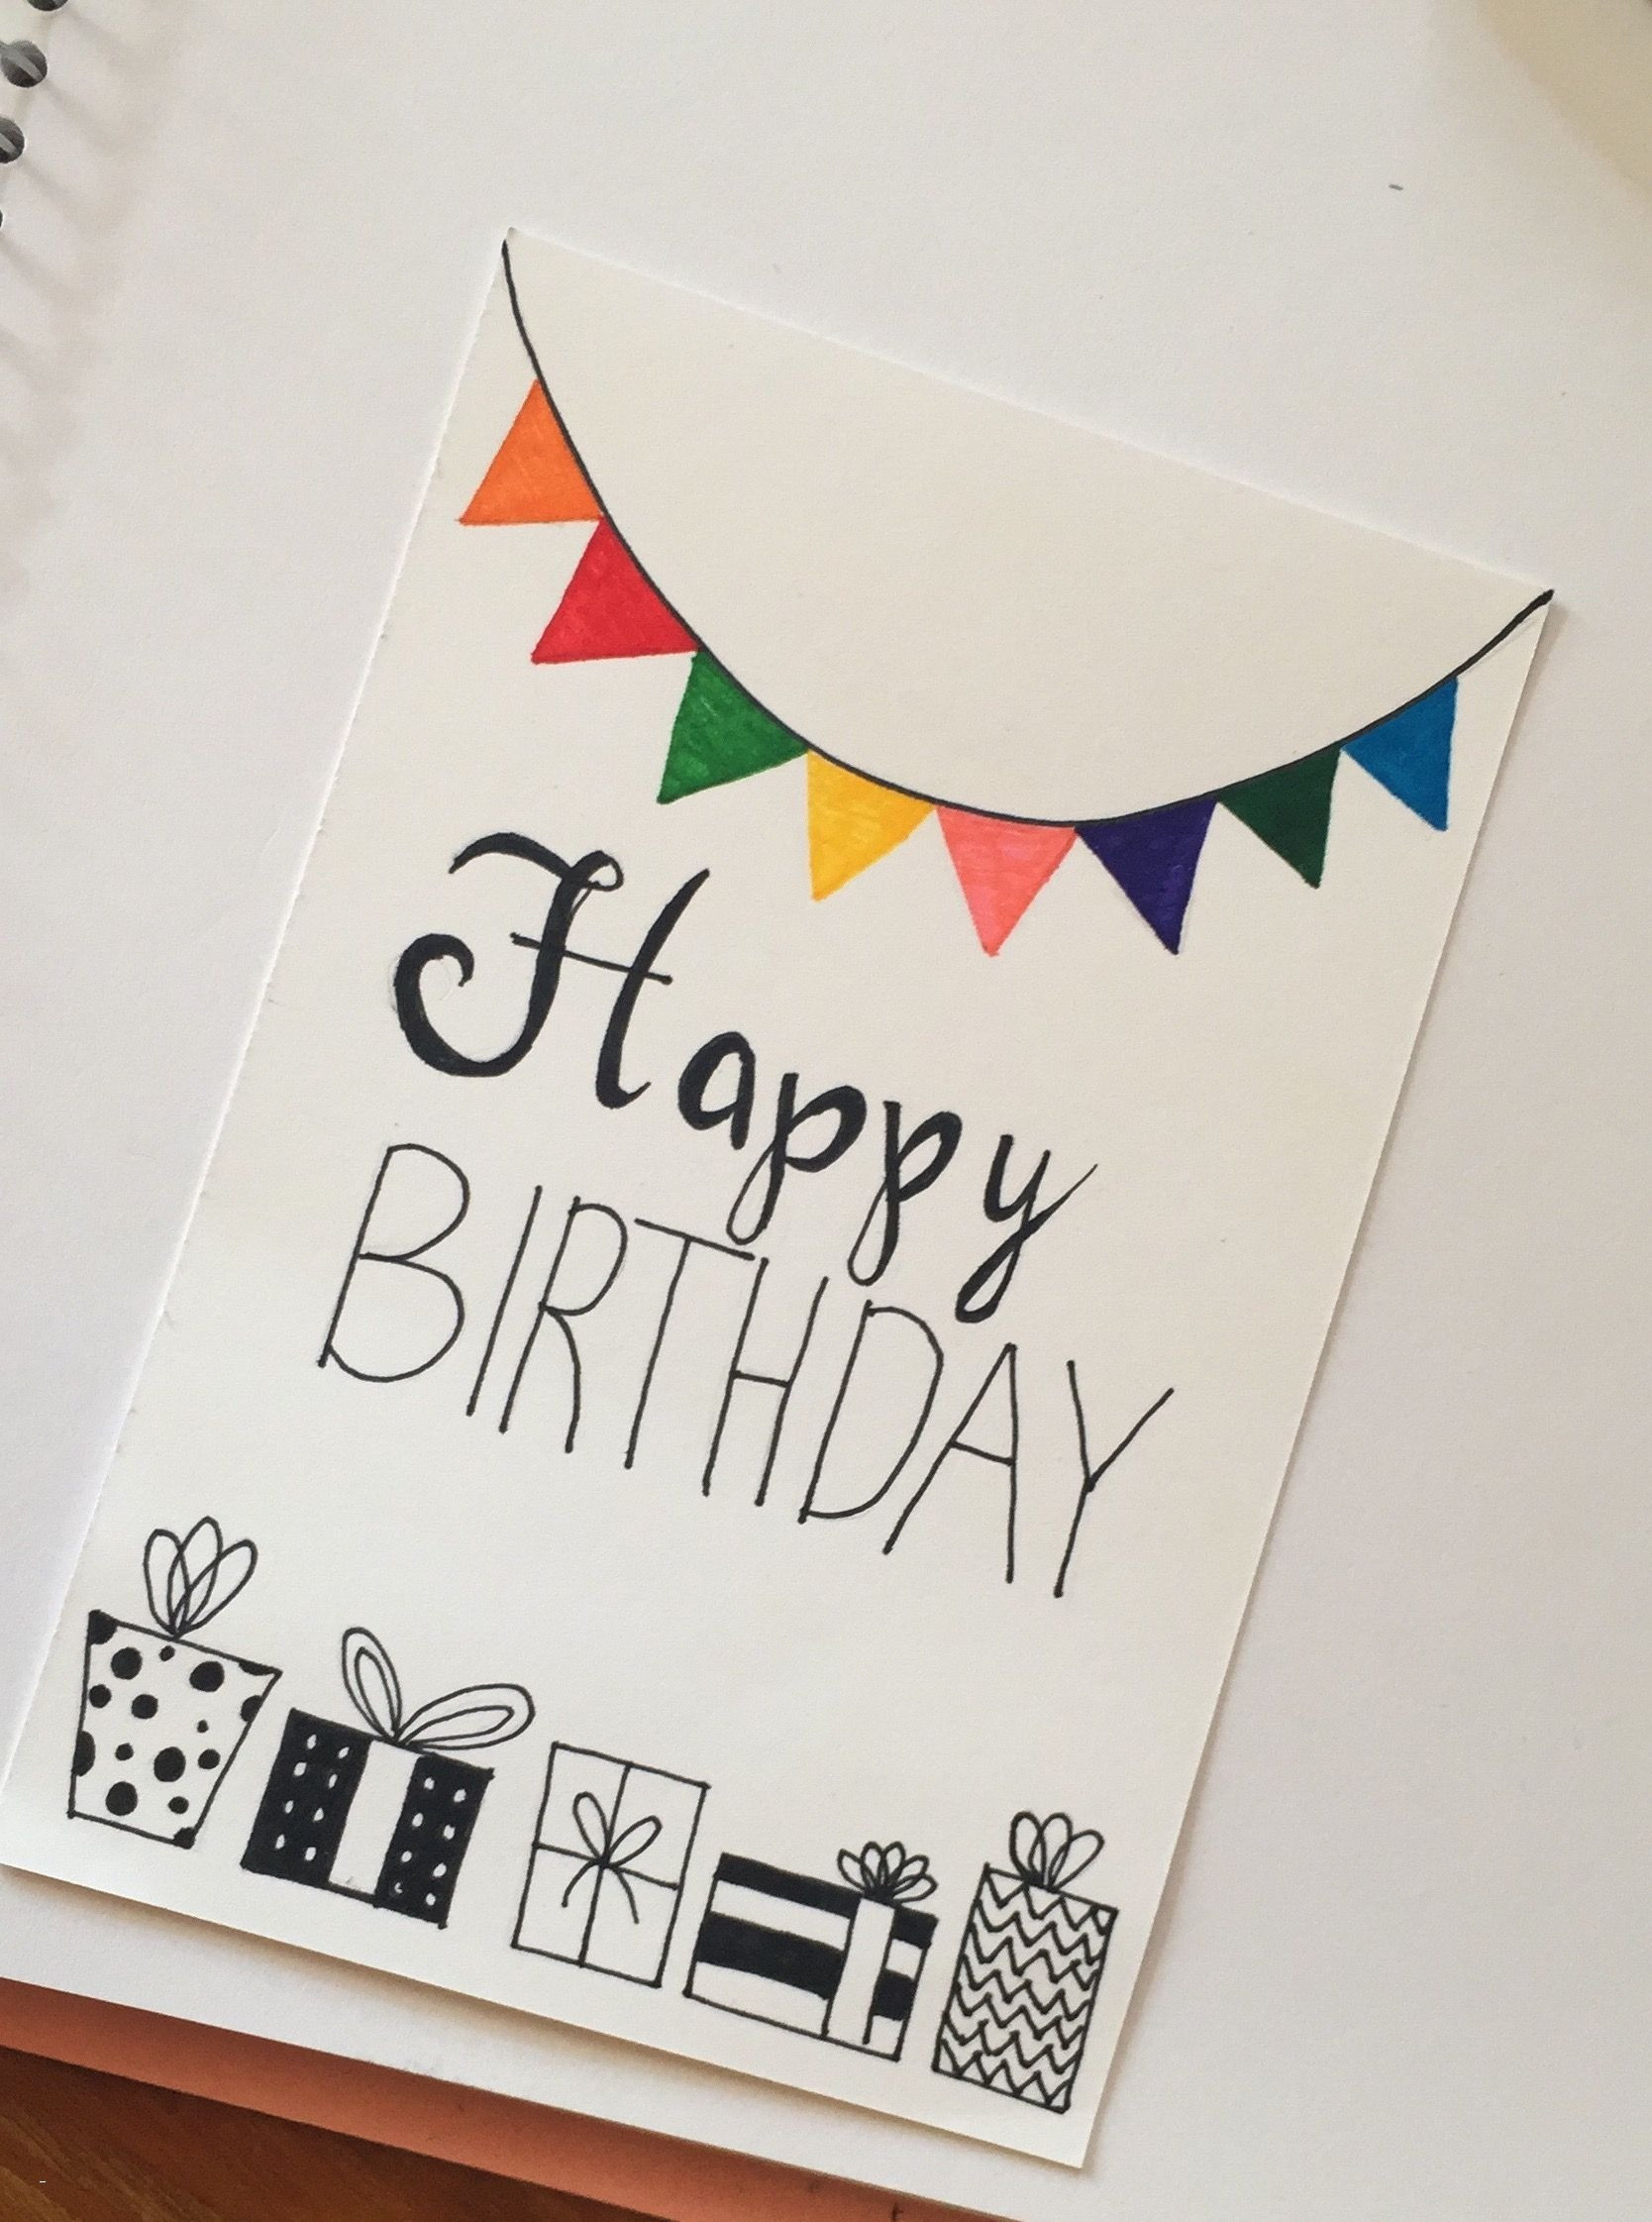 Birthday Cards Ideas For Dad Easy Dad Birthday Card Ideas For From Child Wording Text A S